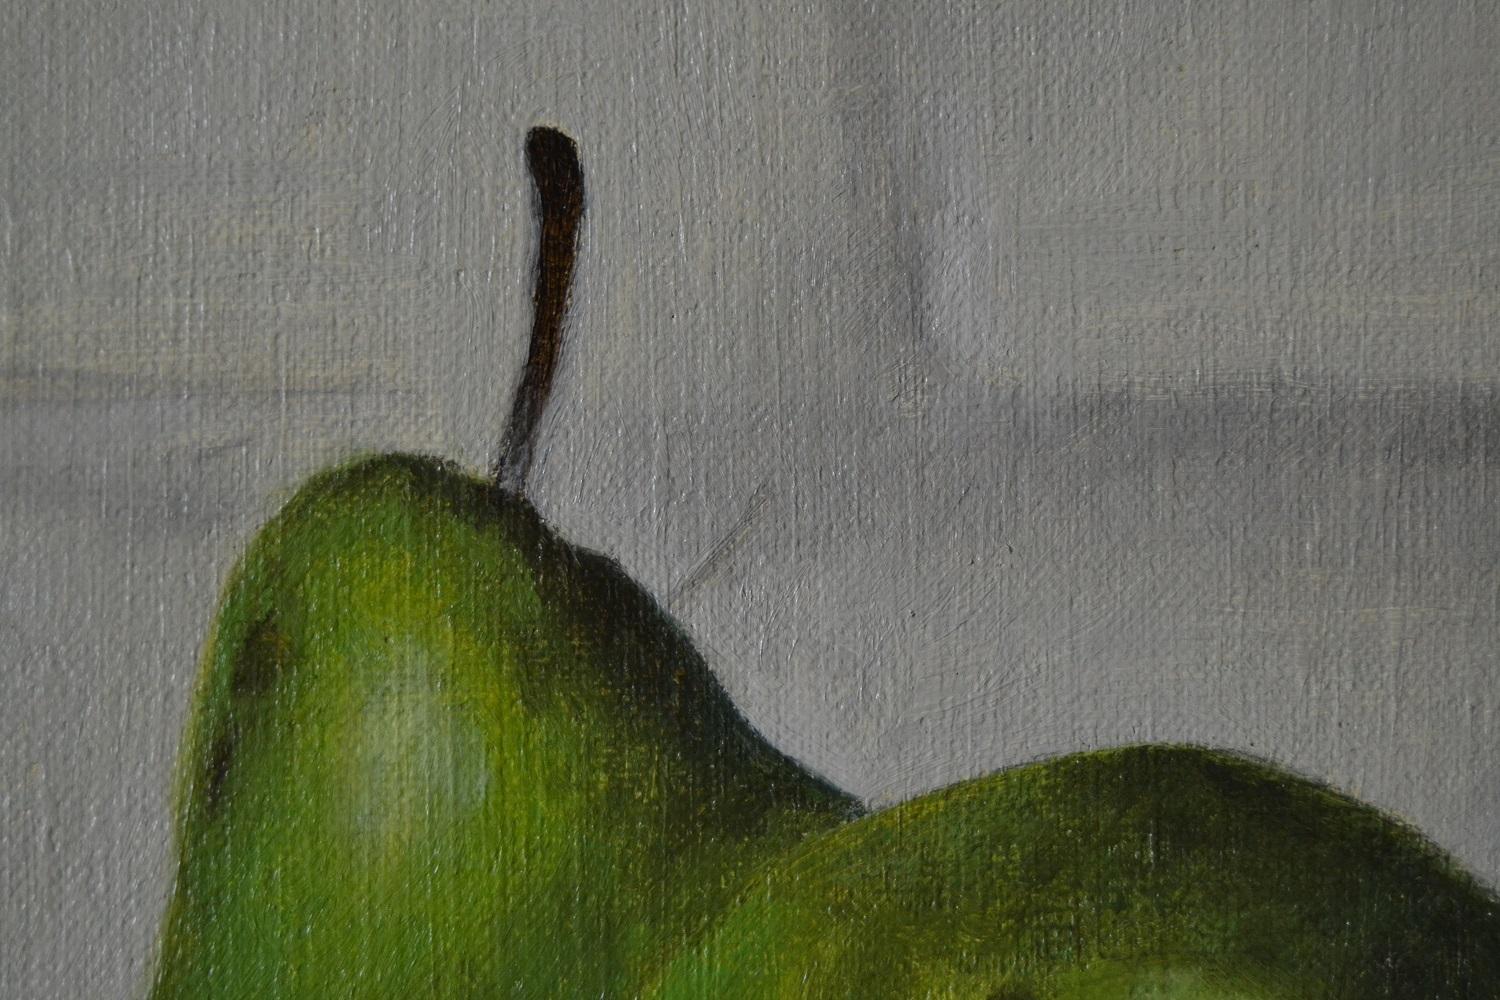 Pears - American Realist Painting by Christopher Garvey